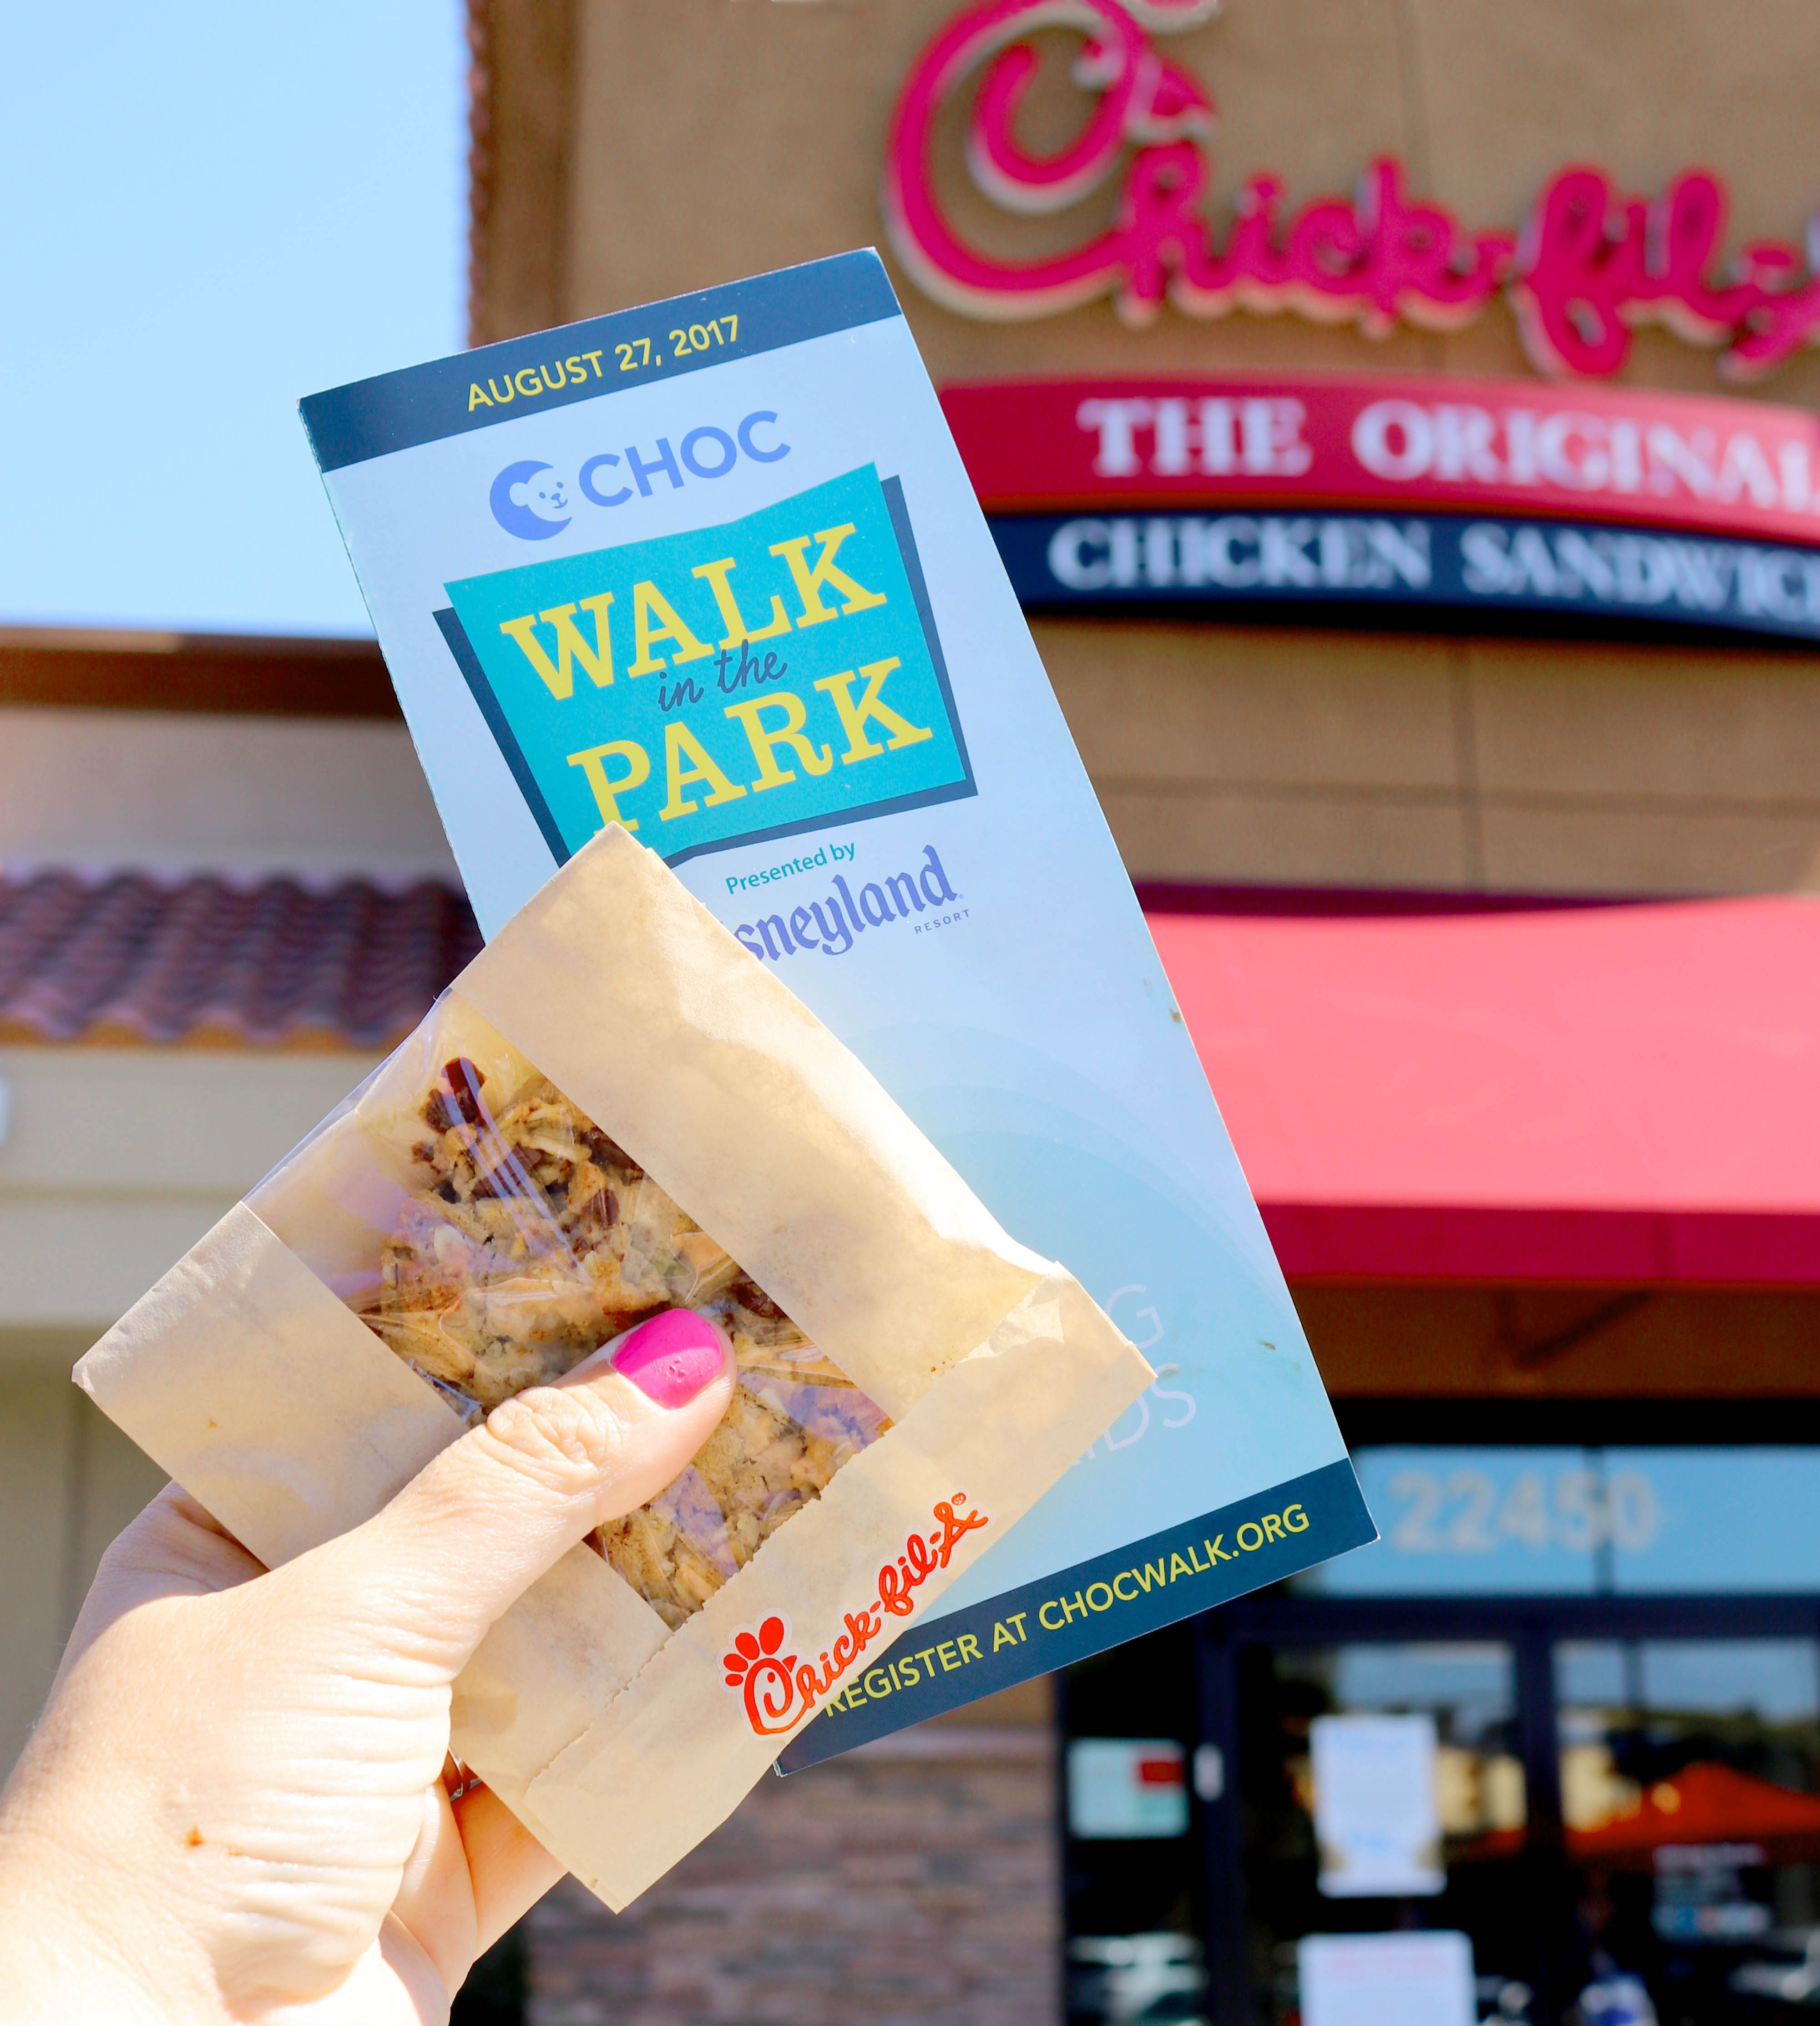 Chick fil a Cookie Day - CHOC Walk in the Park